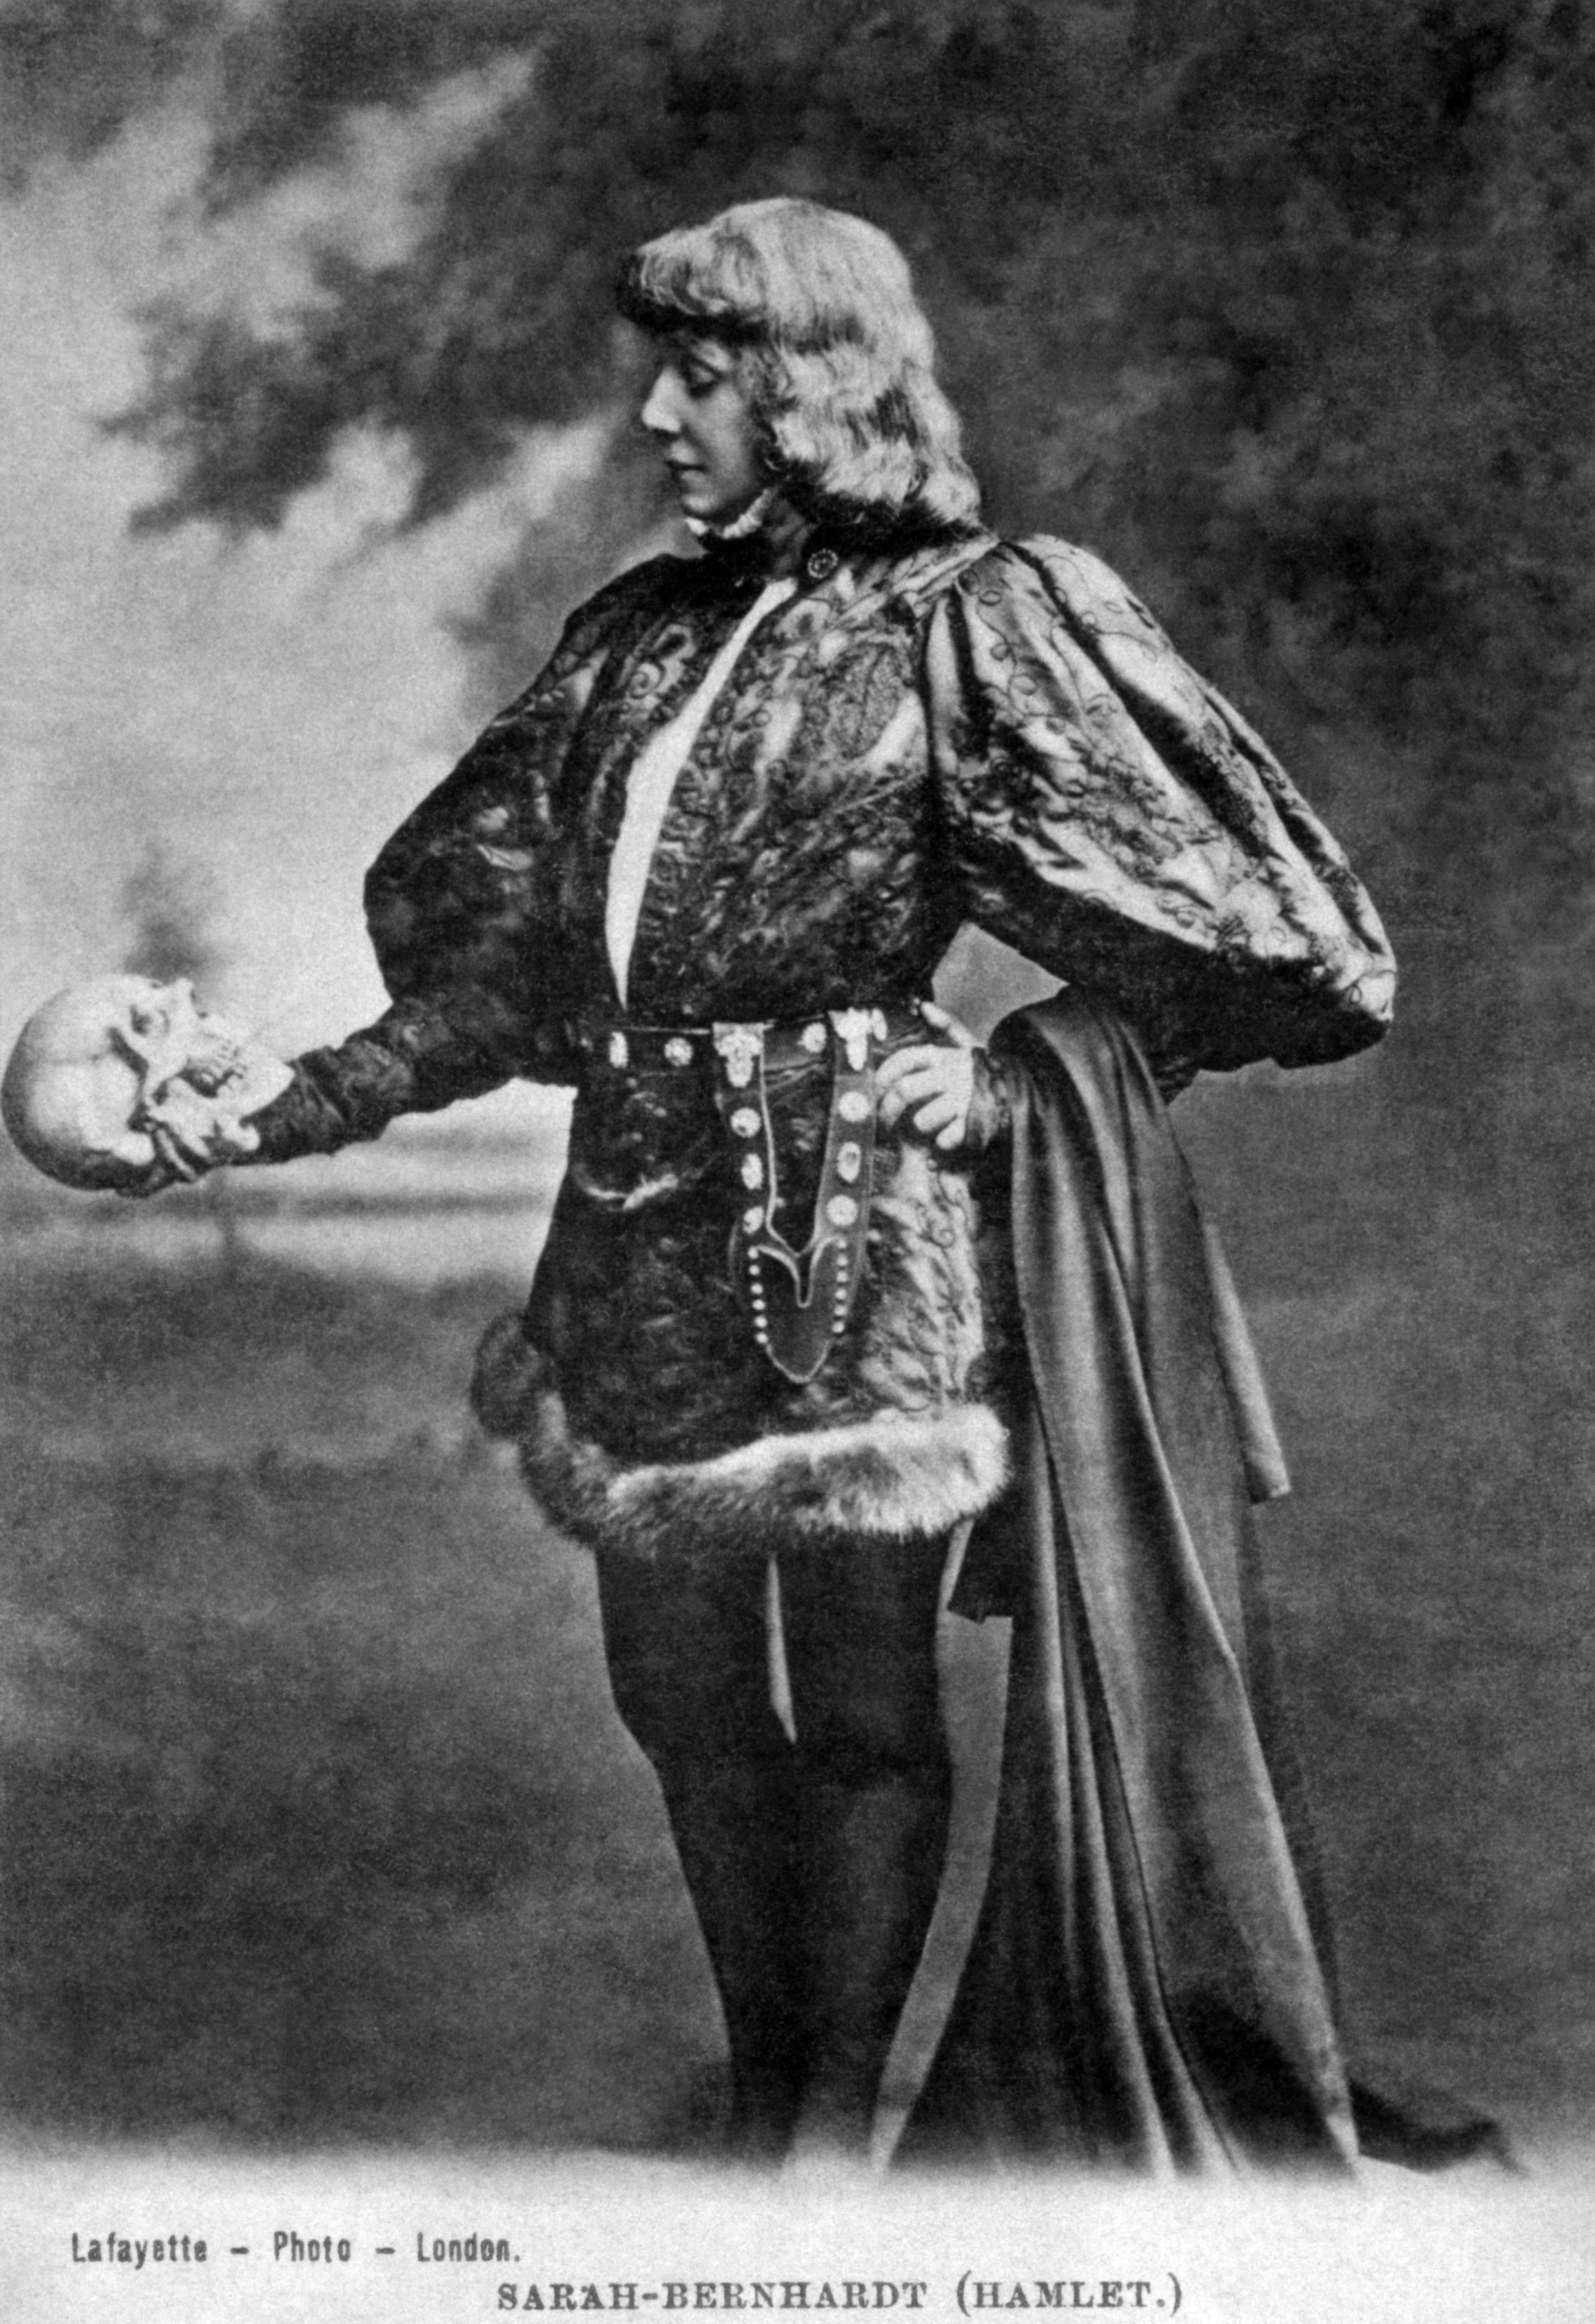 Still of Sarah Bernhardt in the titular role of Hamlet from her 1899–1900 run.